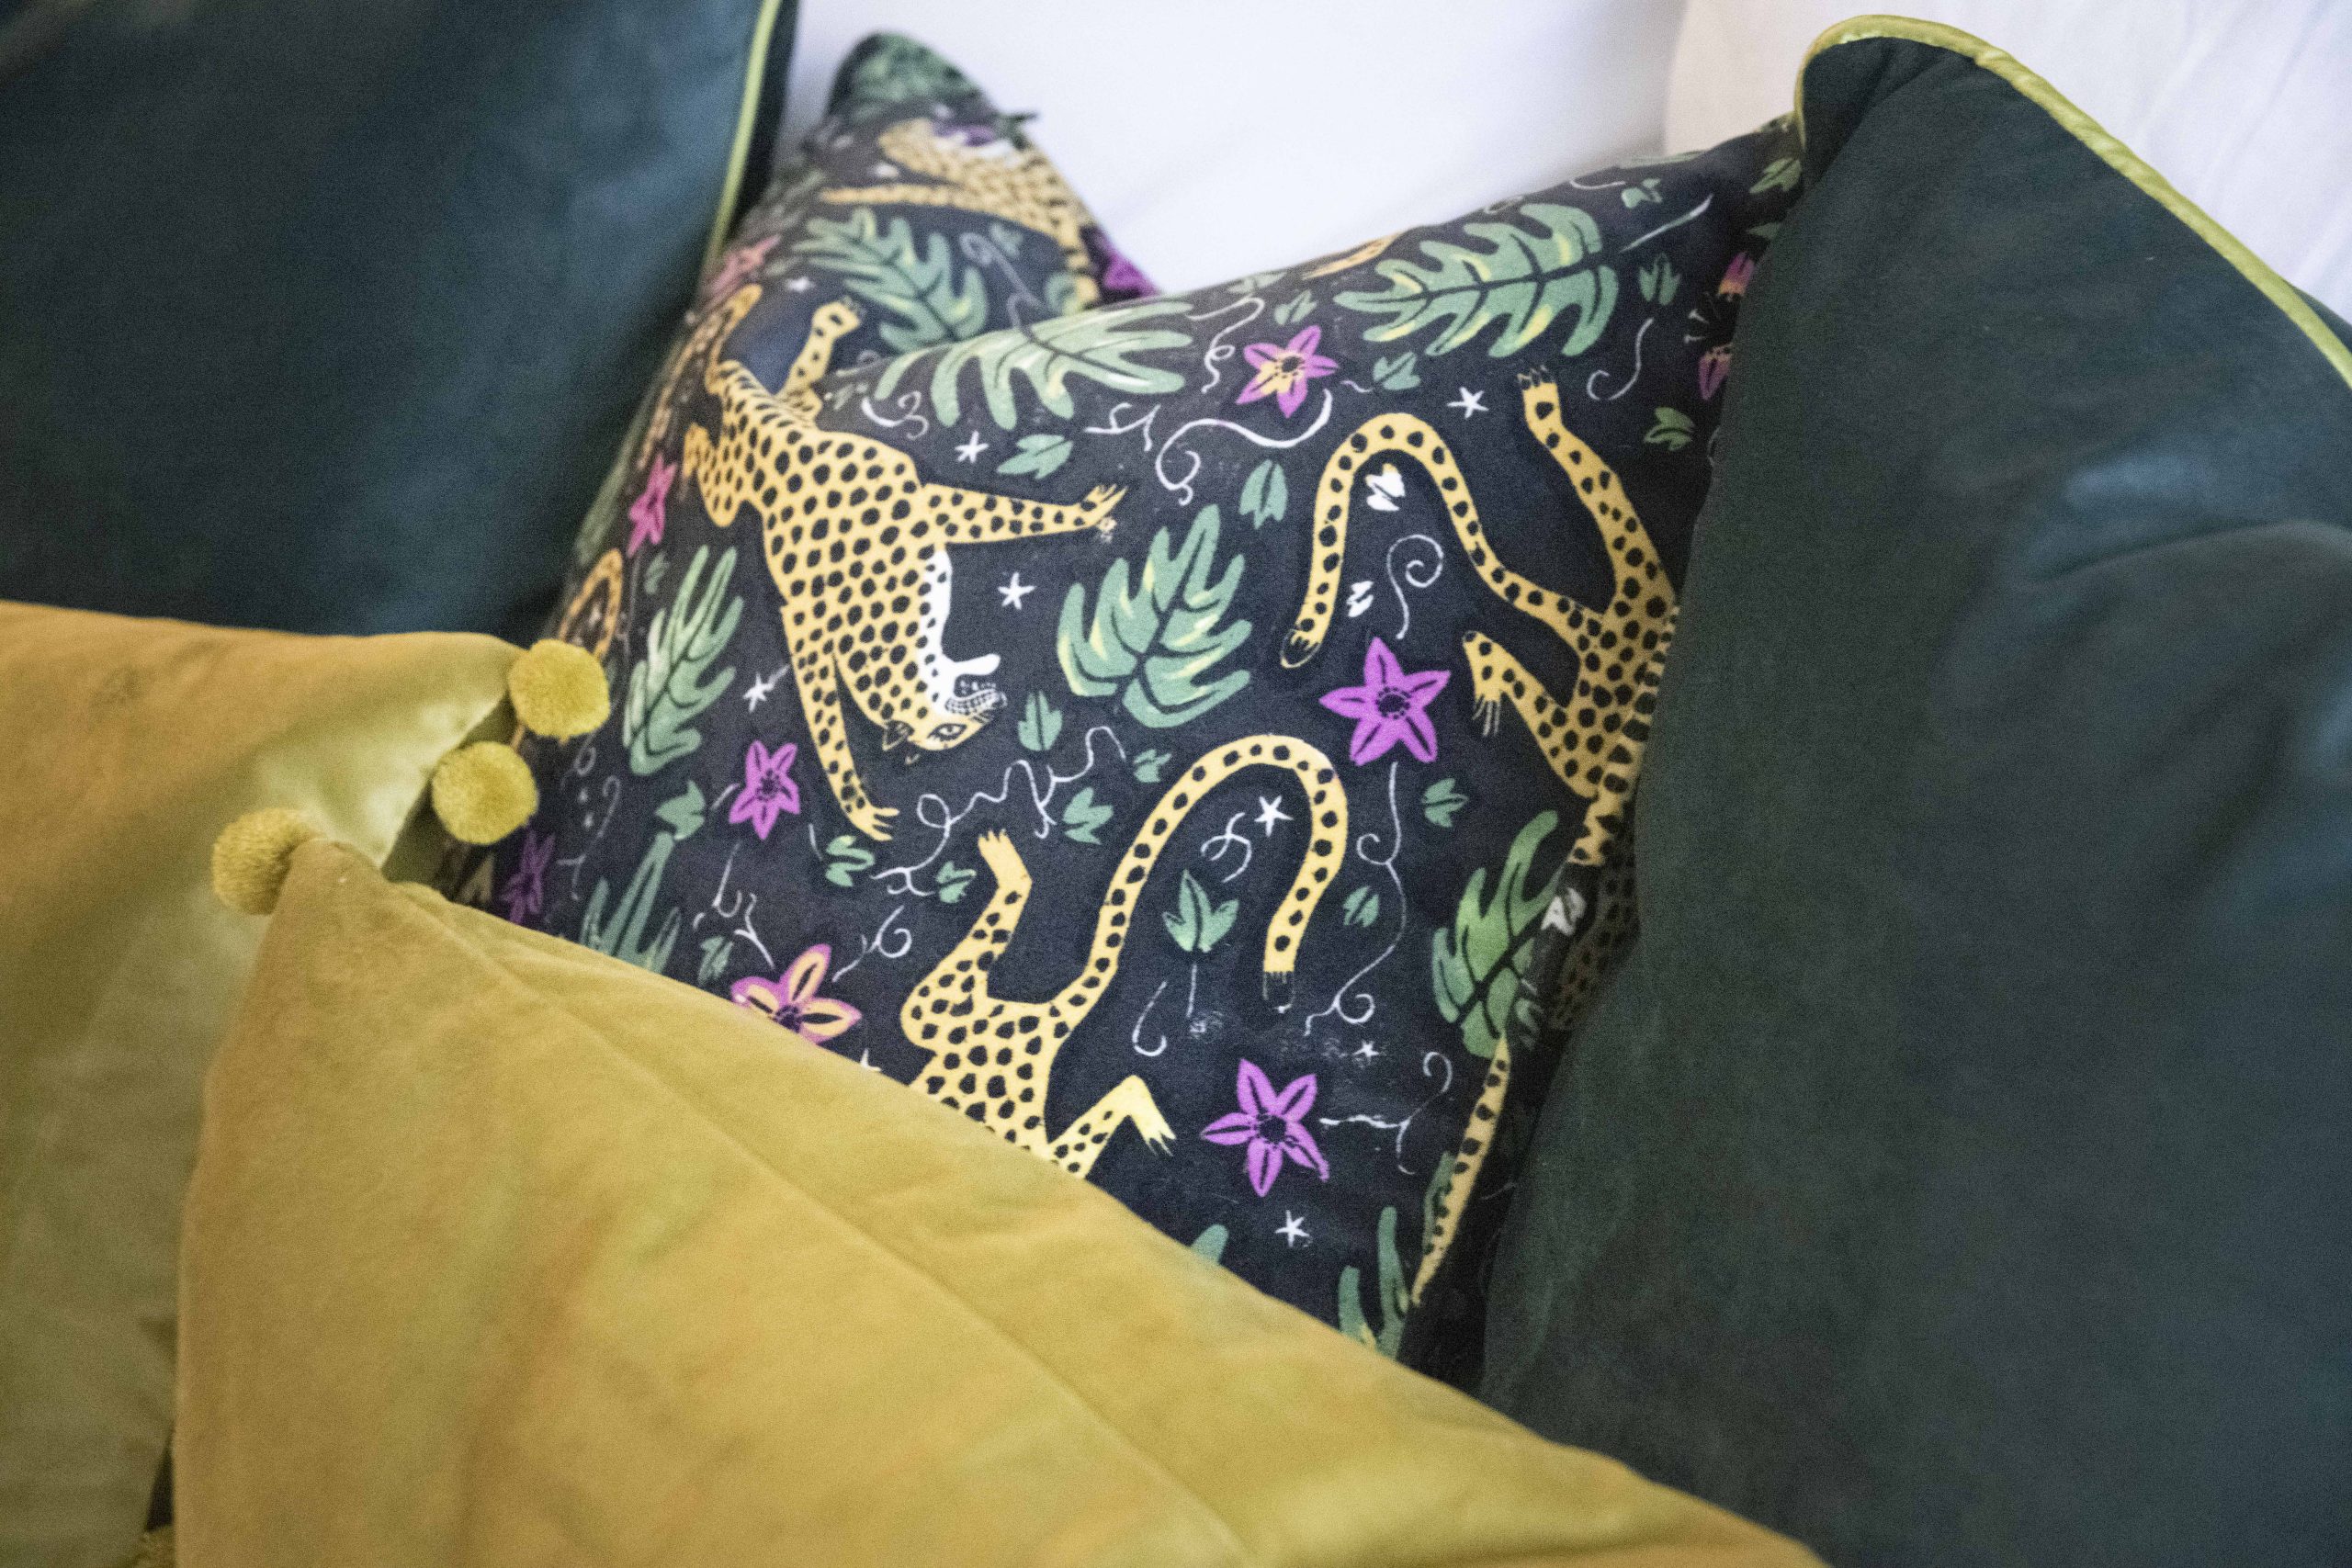 Patterned cushions add the finishing touch.